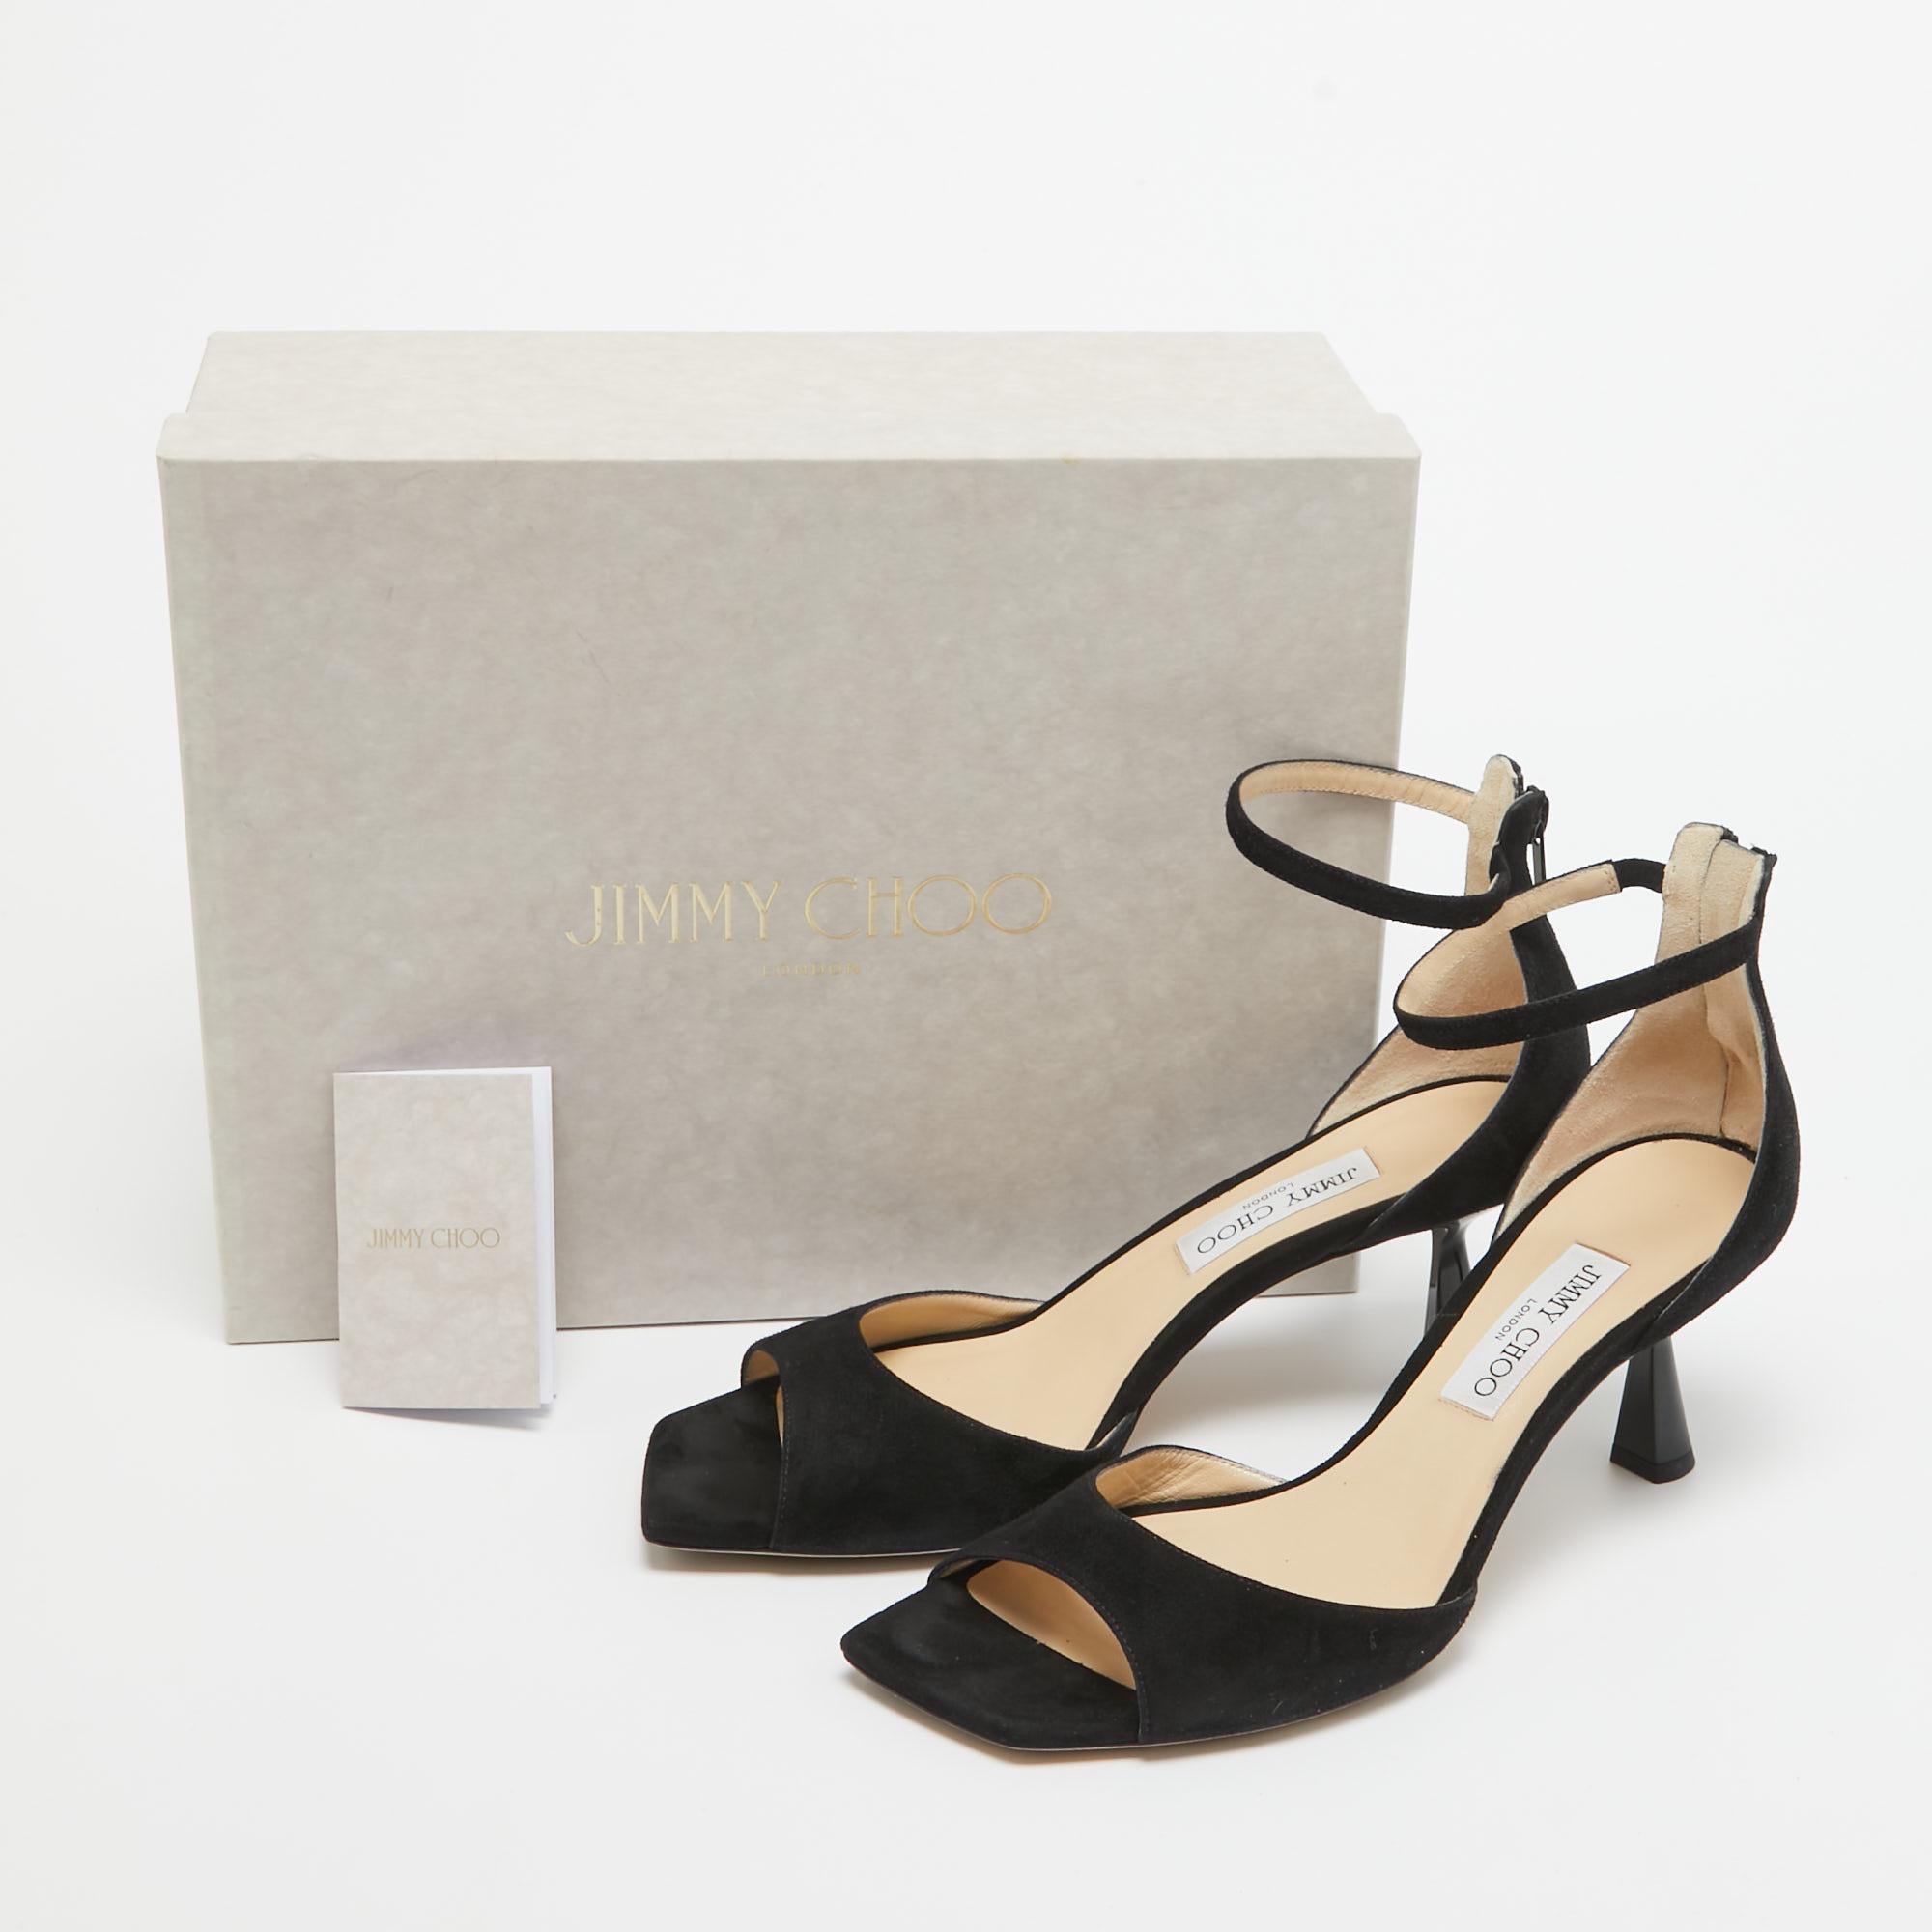 Jimmy Choo Black Suede Reon Sandals Size 41 3